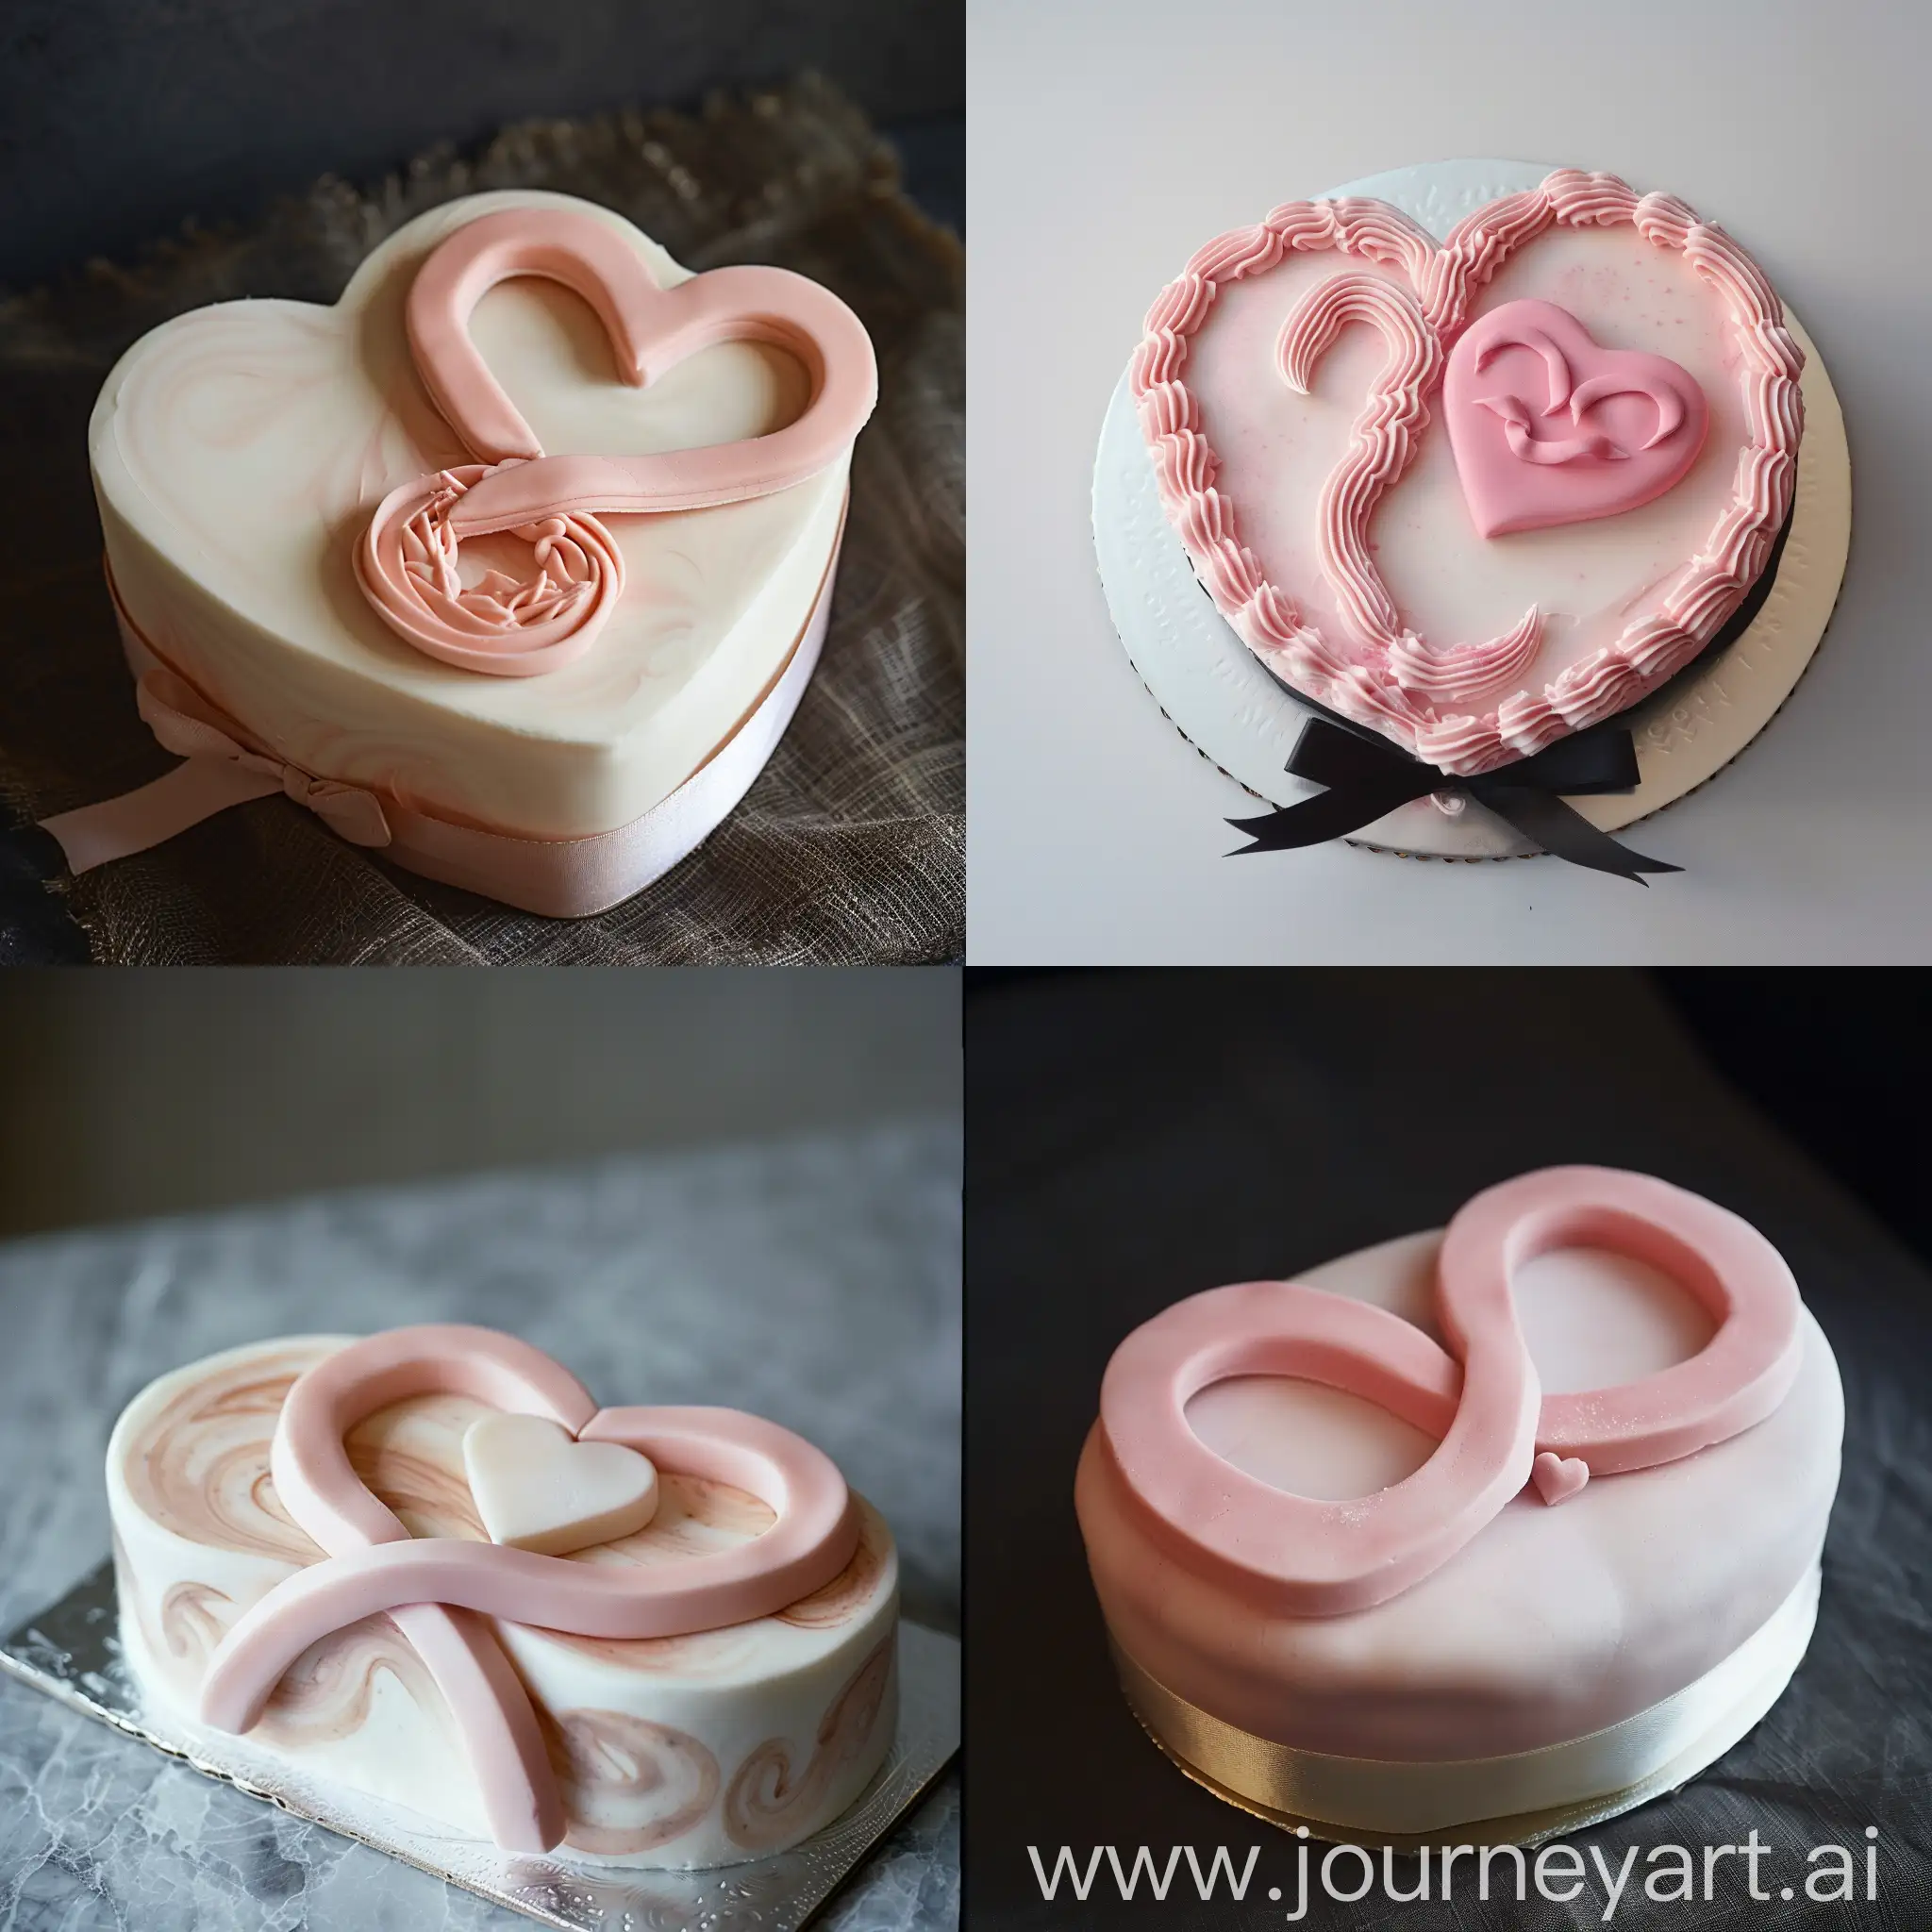 A (((delicate cake))) in the shape of two interlocking pink hearts and a flowing ((infinity symbol))